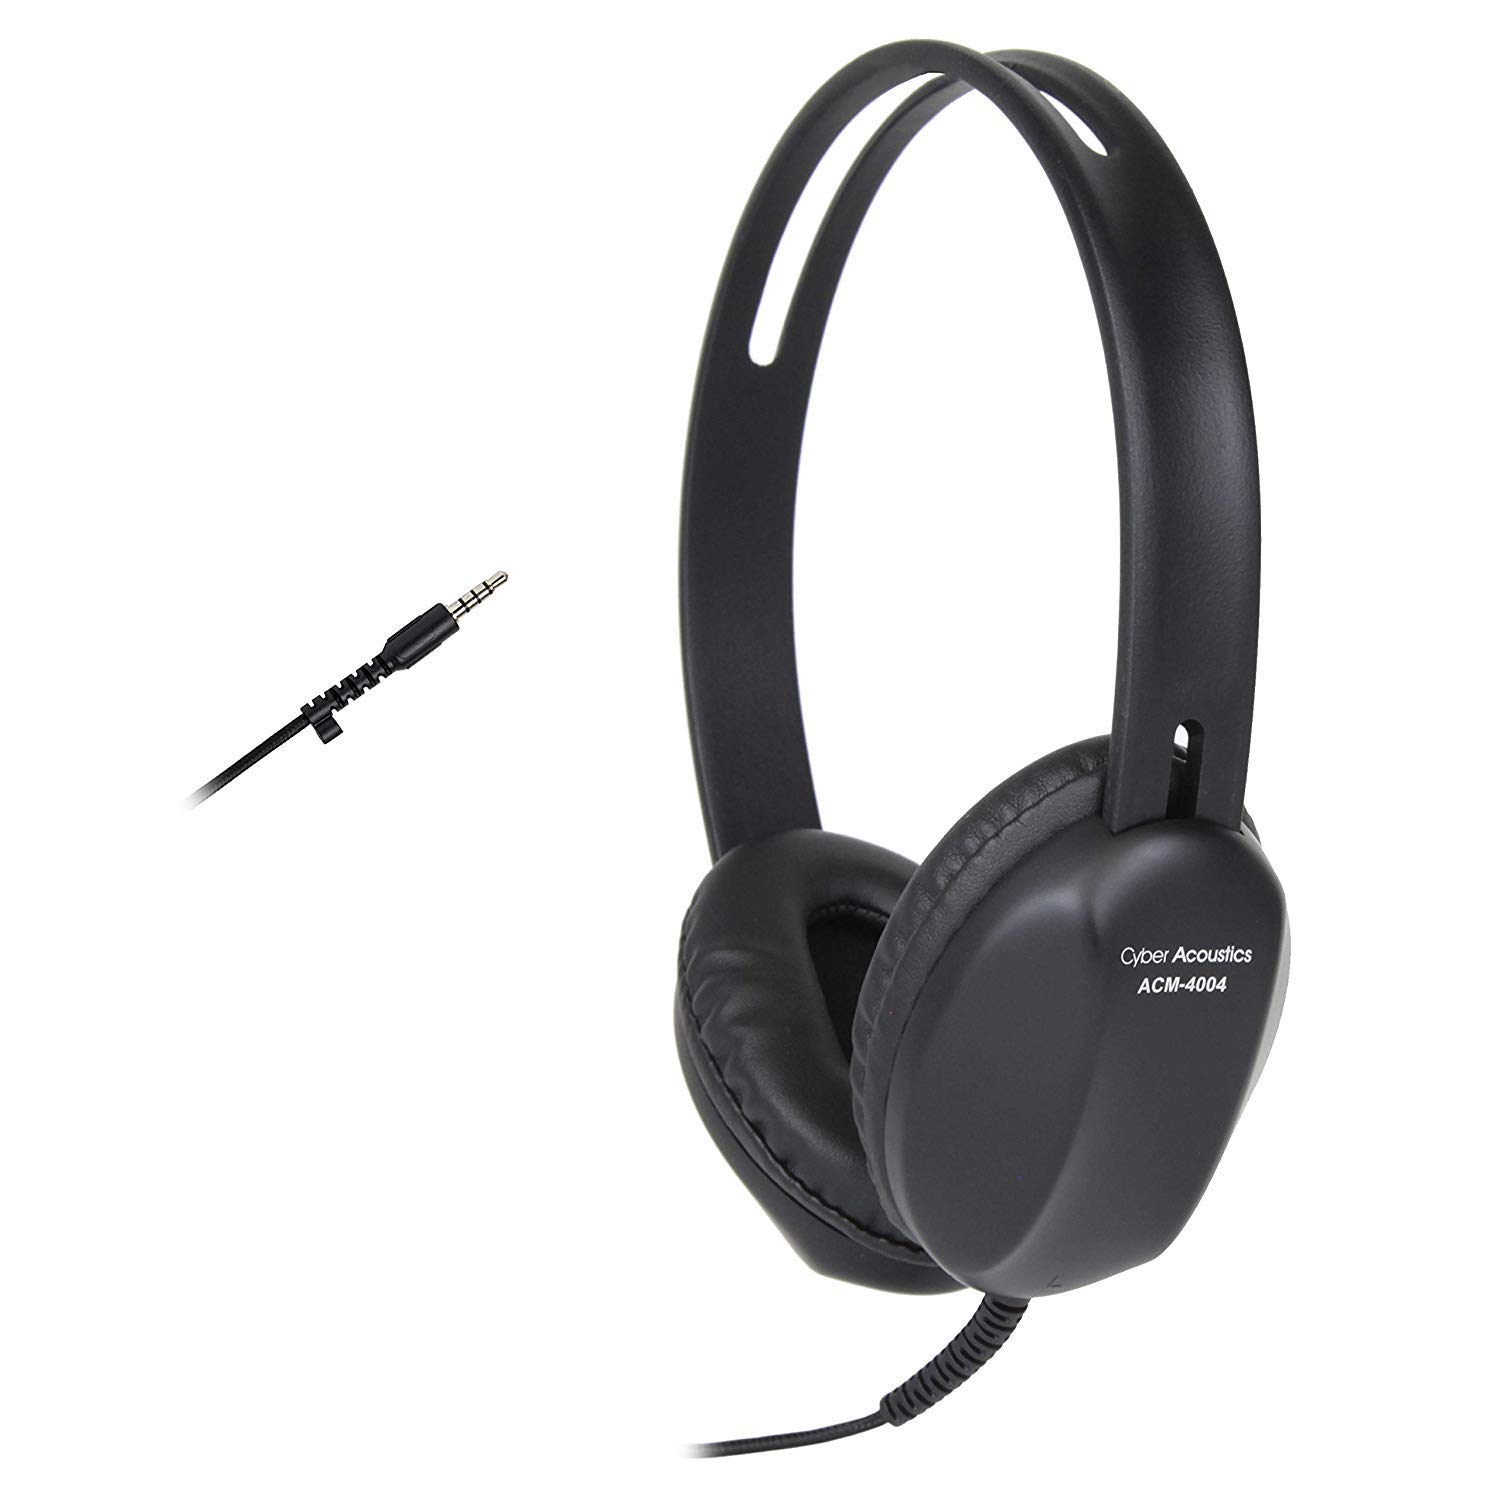 Cyber Acoustics Lightweight 3.5mm Headphones - 80 Pack - Great for use with Cell Phones,Tablets, Laptops, PCs, Macs (ACM-4004-80)